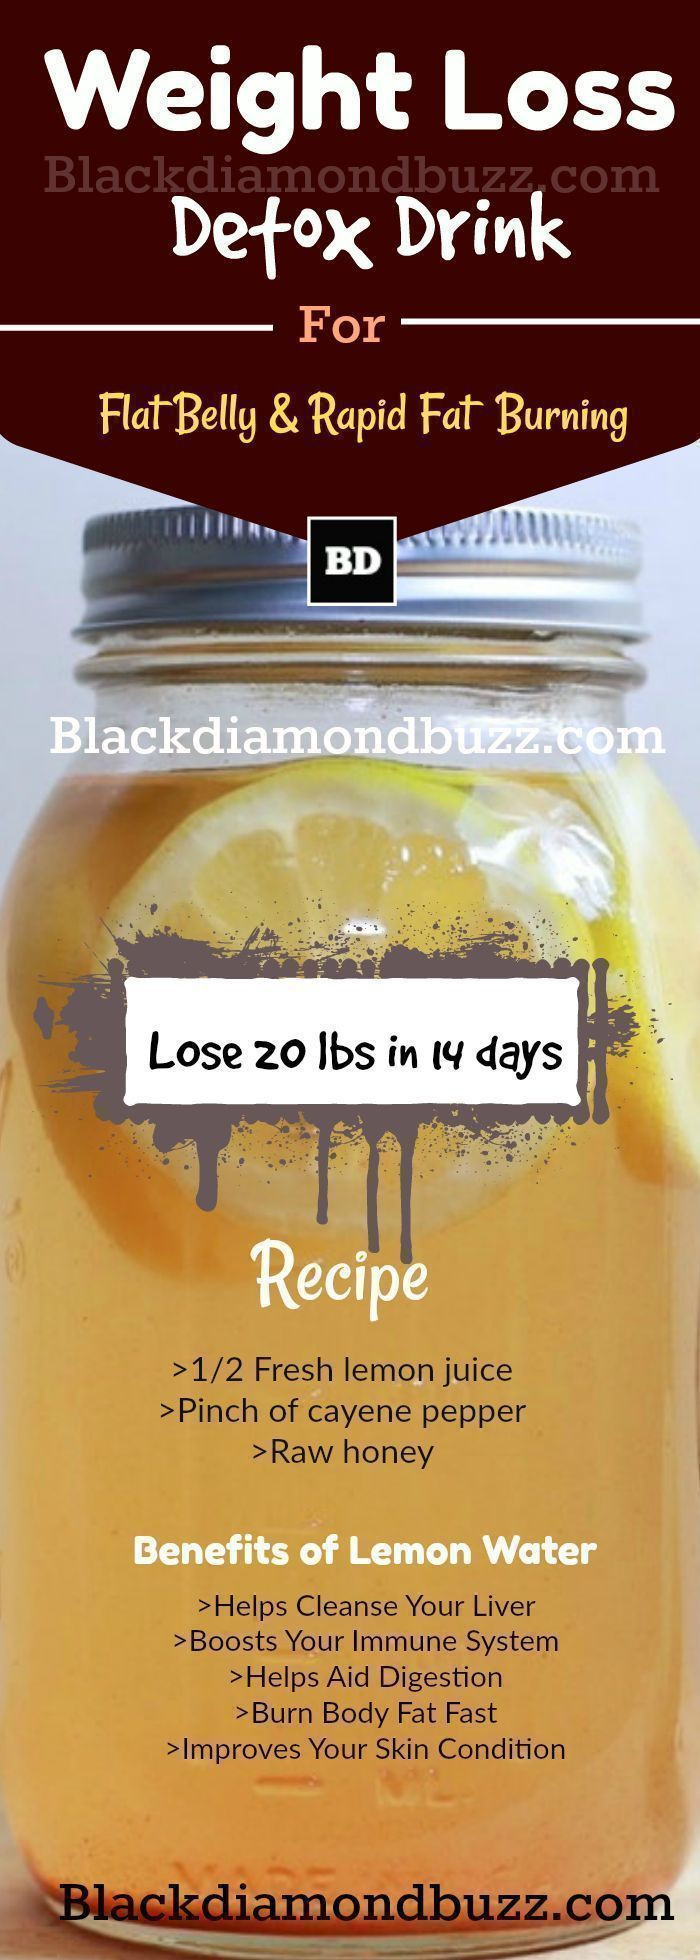 Extreme Weight Loss Recipes
 Lemon water and Cayenne Pepper Drink Recipe for Extreme